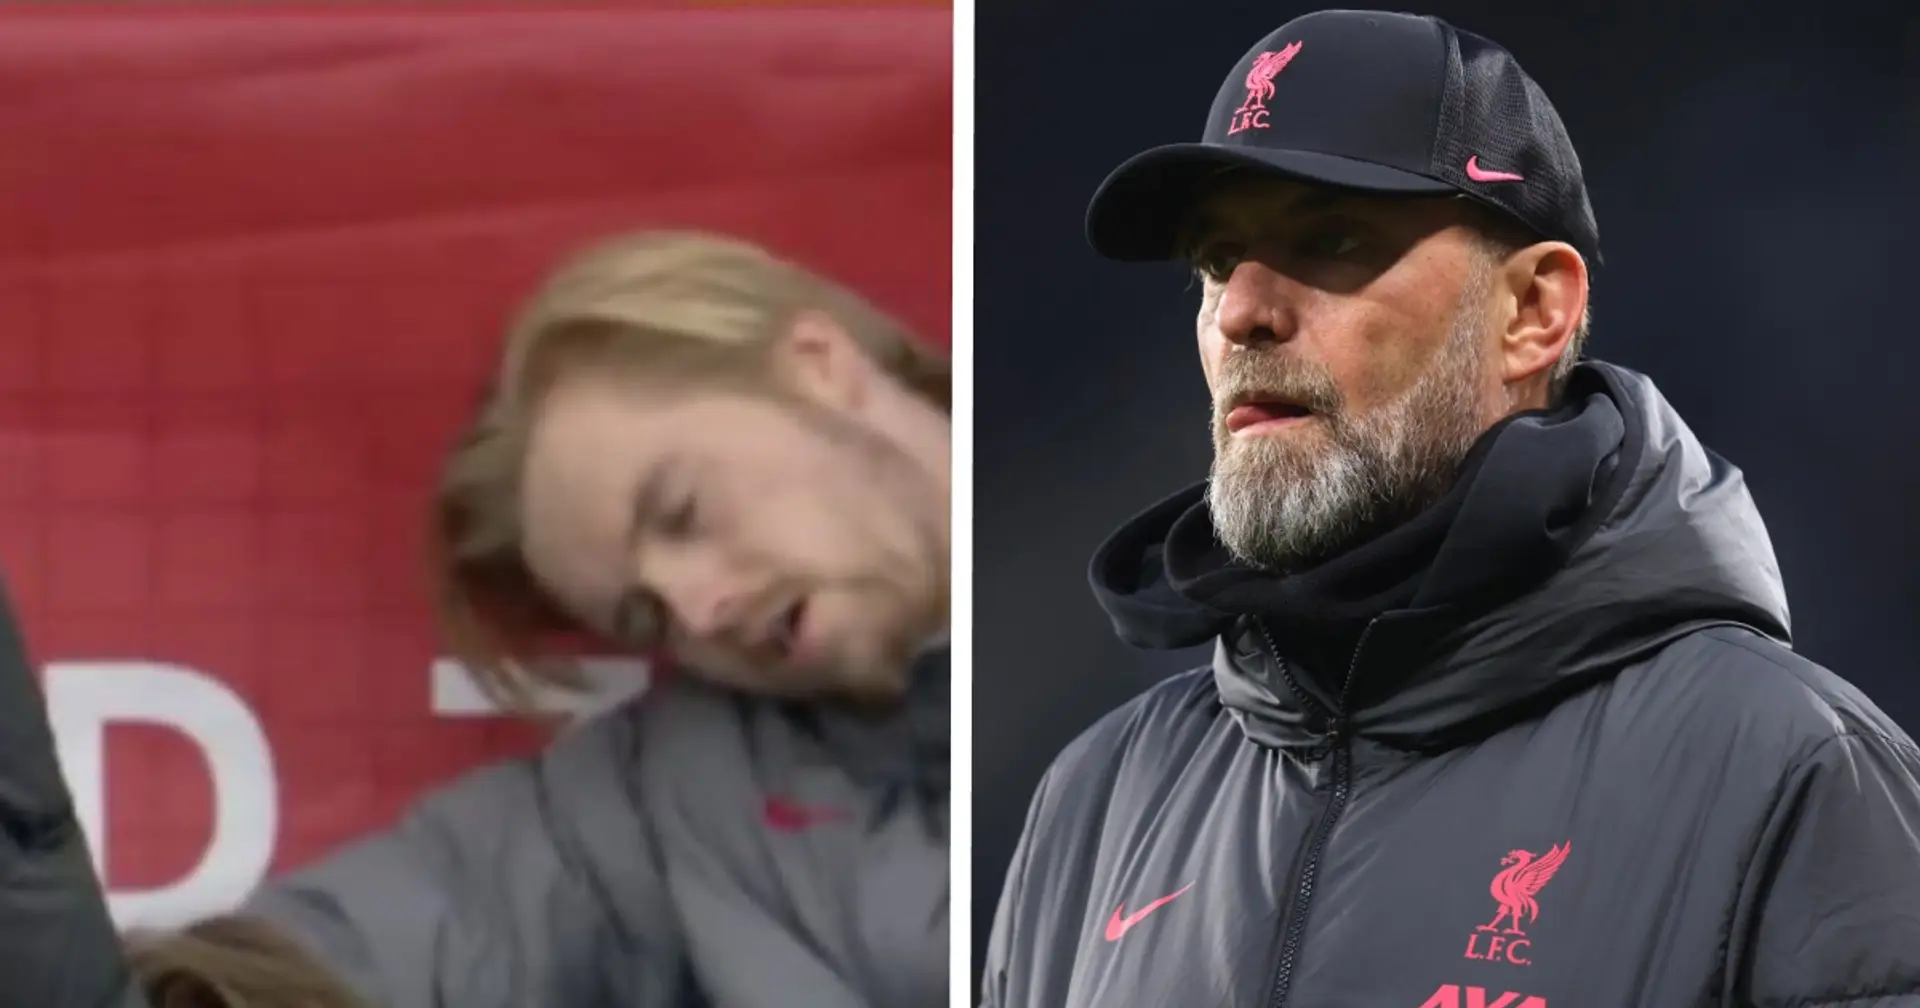 Recalling when Liverpool backup keeper Kelleher seemed to fall asleep on the bench — what happened 